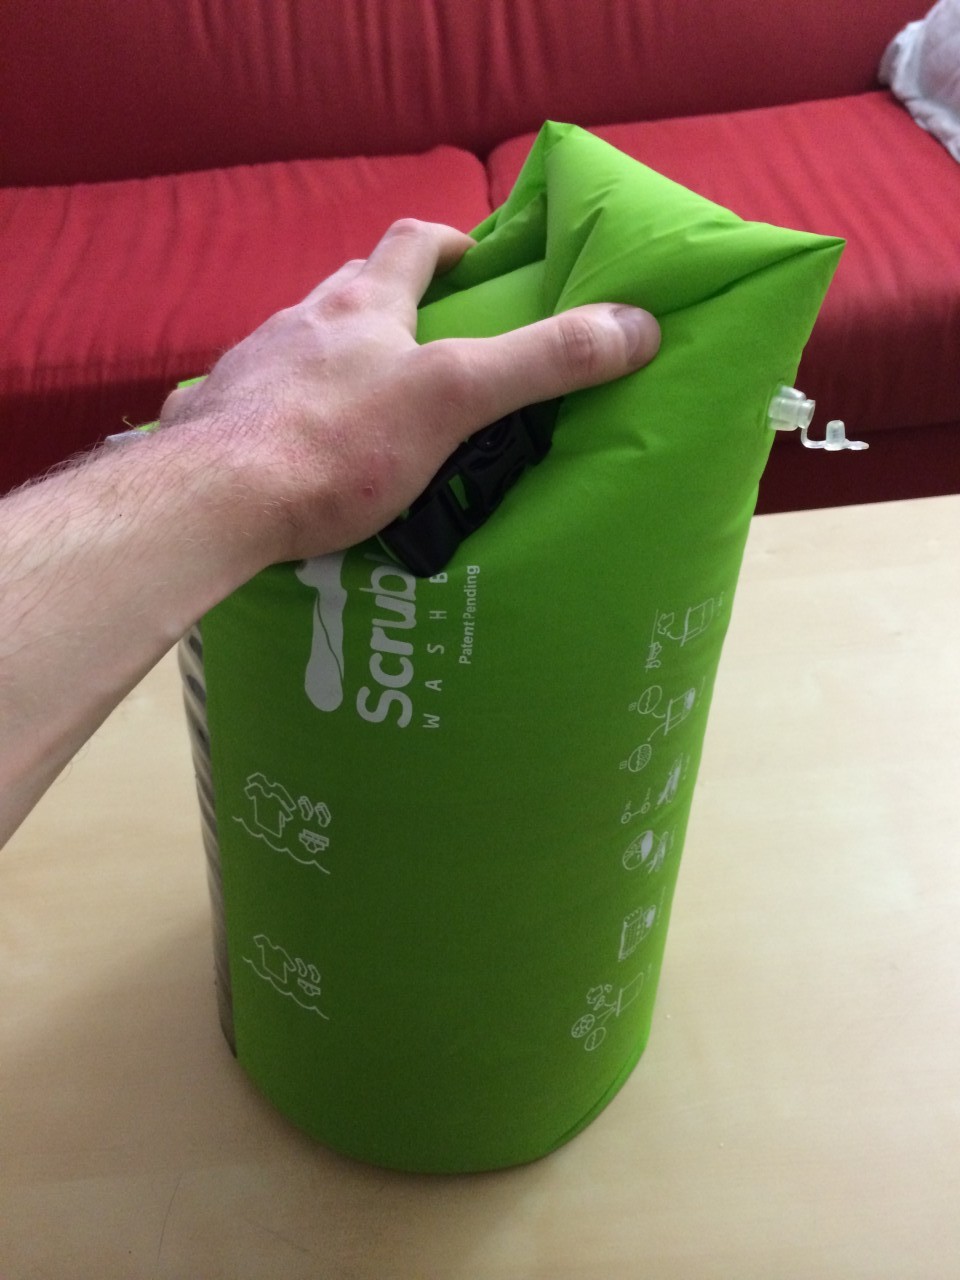 The Scrubba Wash Bag Will Make Your Clothes Appear Clean, but ARE They?